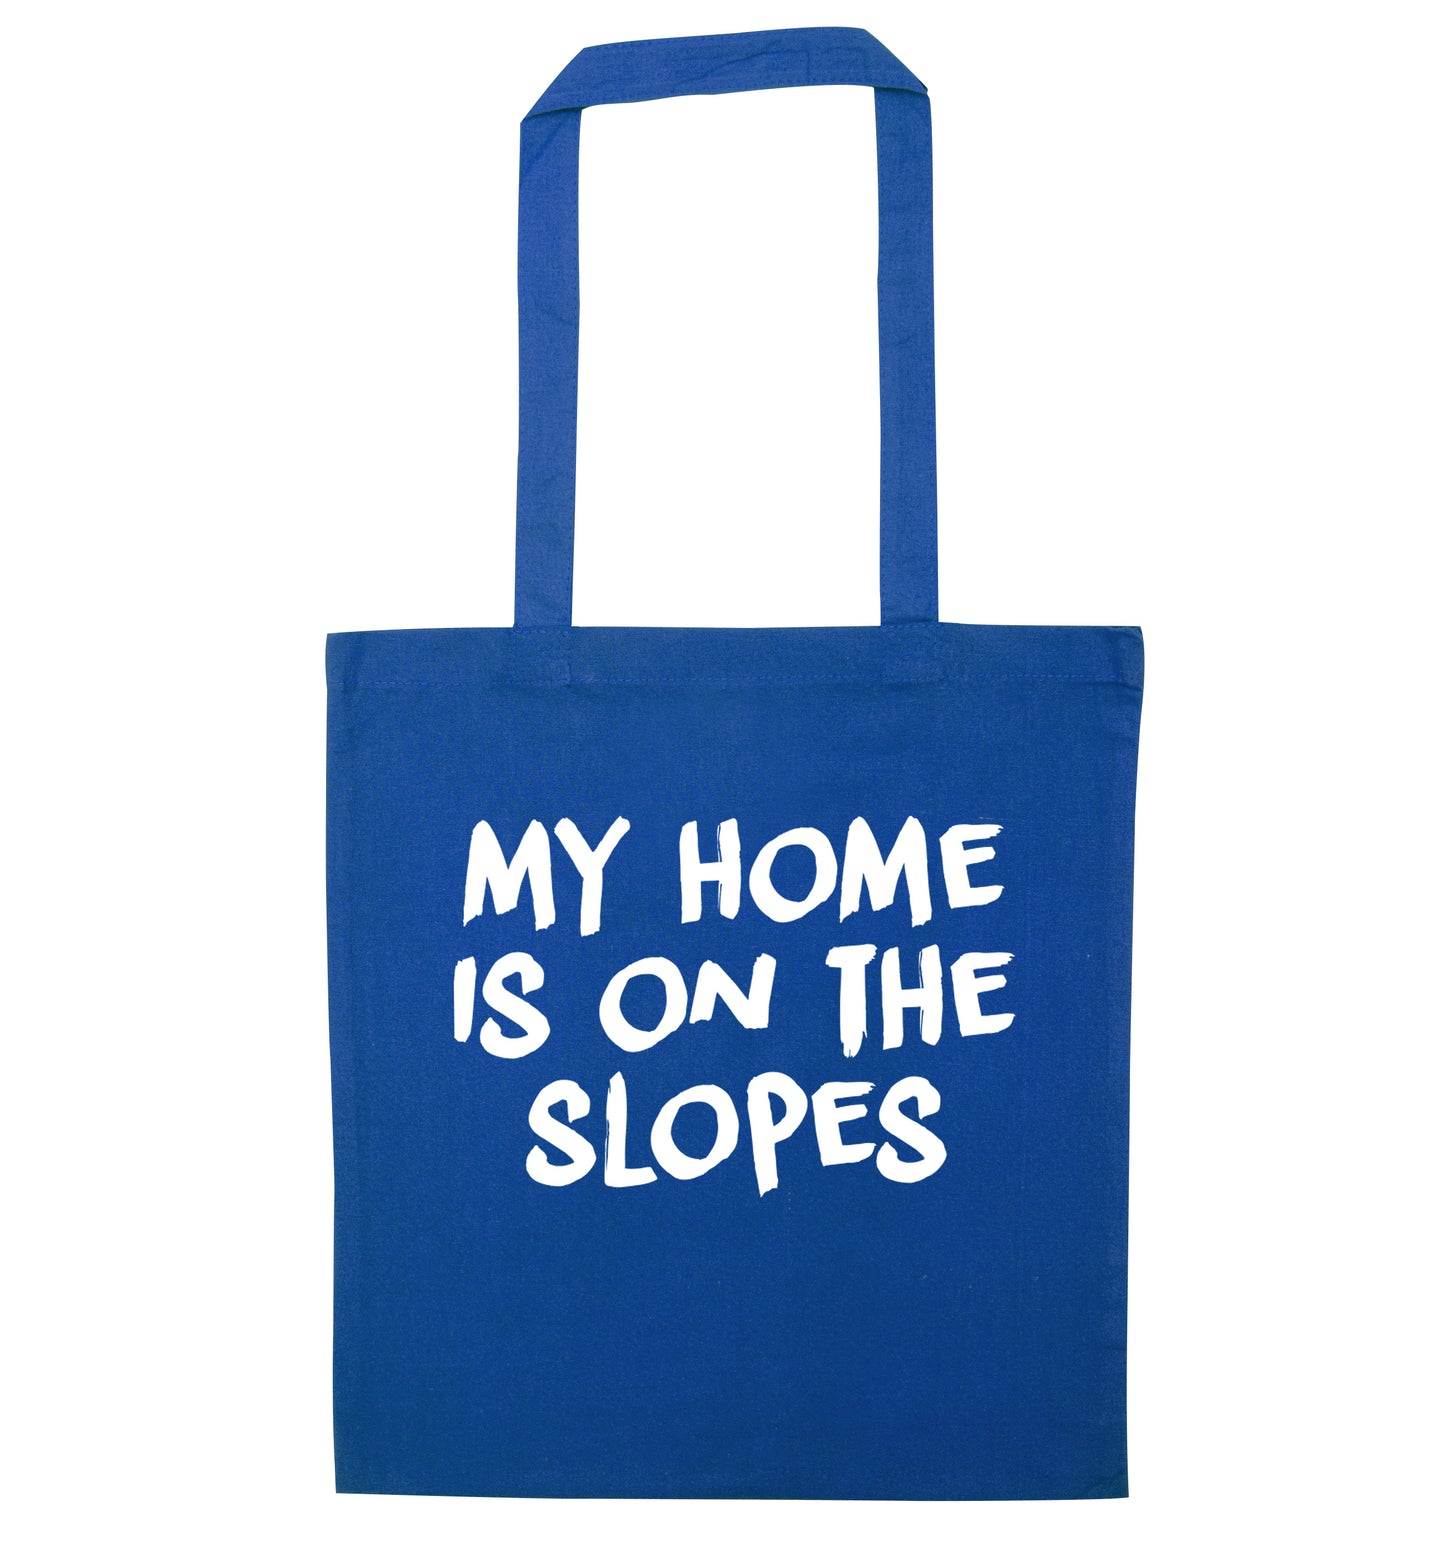 My home is on the slopes blue tote bag